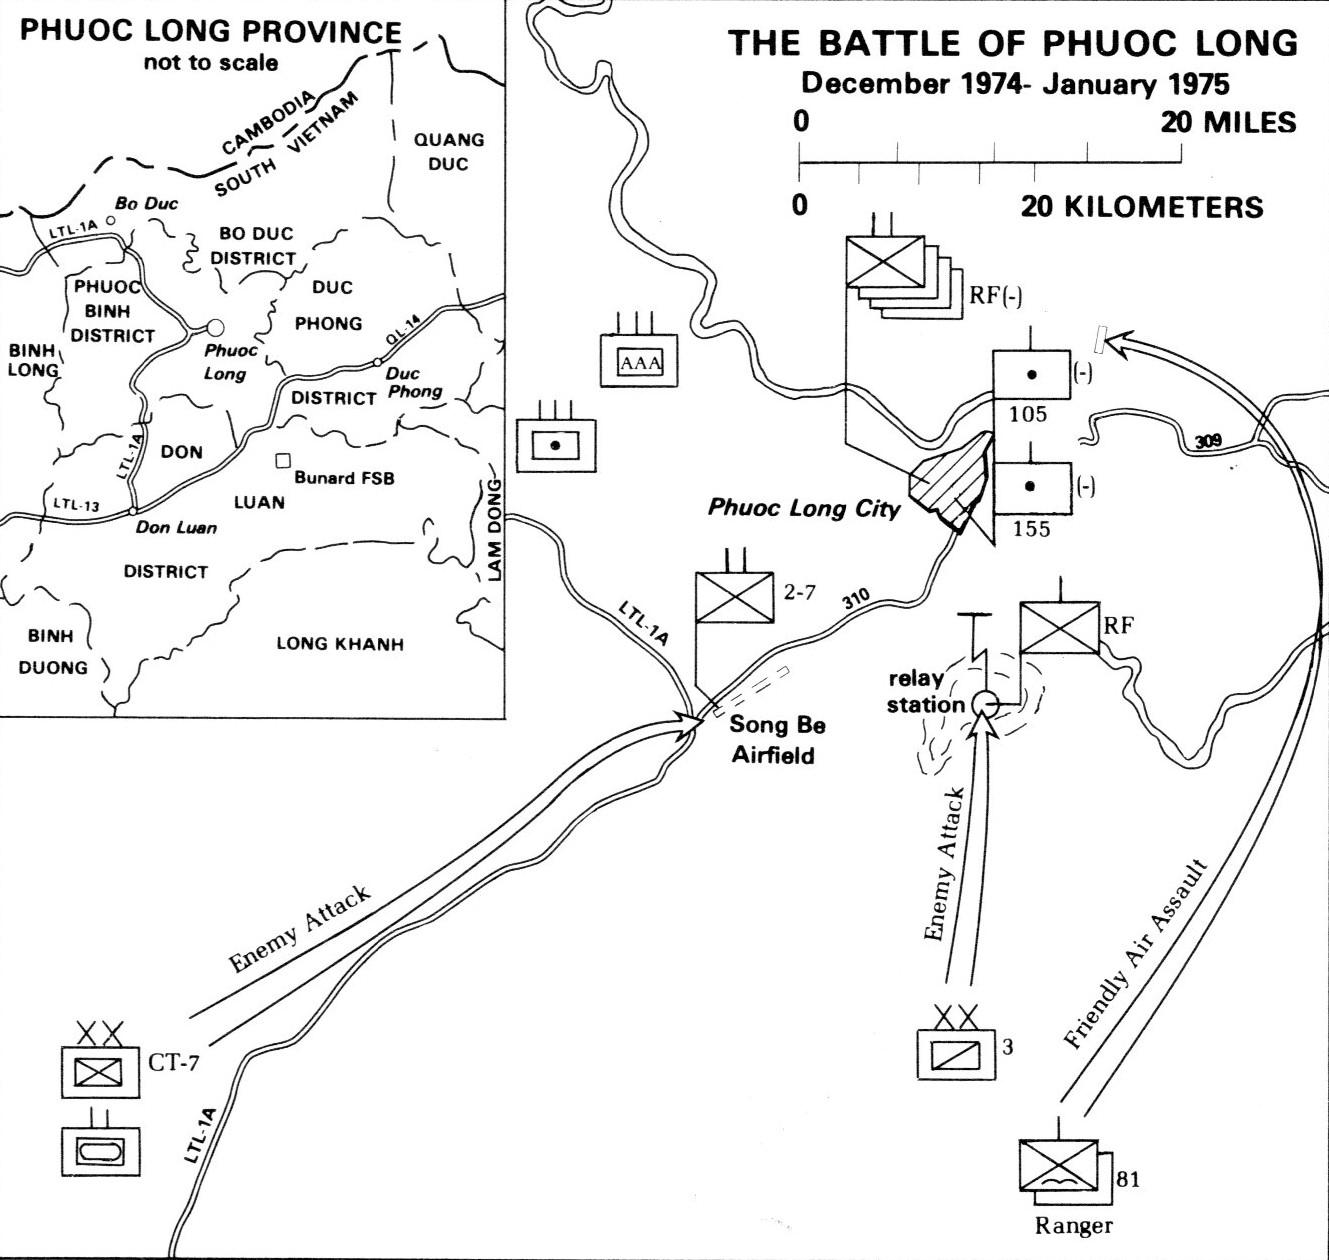 A map of the battle of phuoc long

Description automatically generated